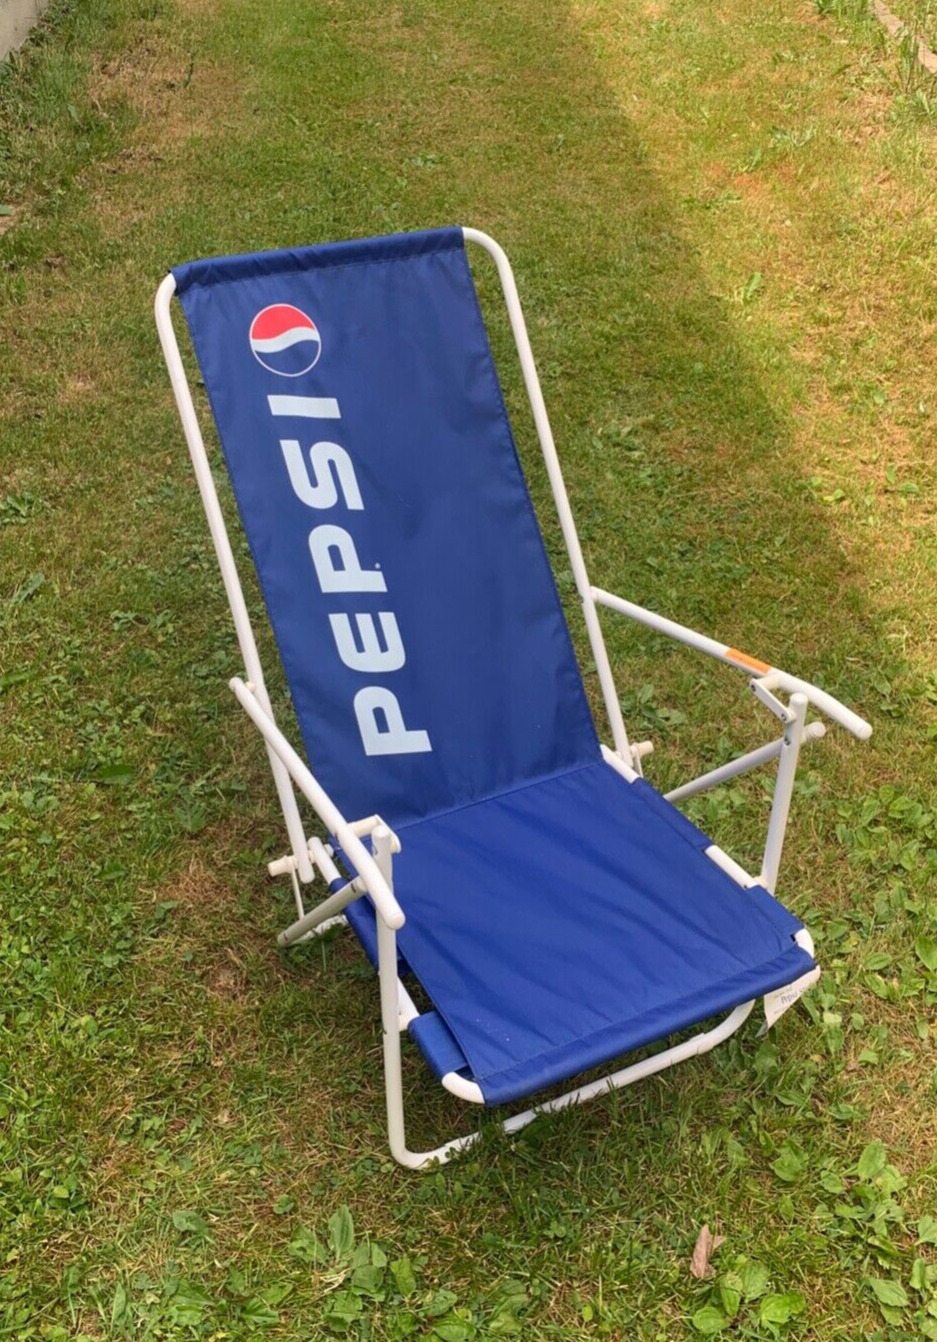 Unused Metal Pepsi Folding Beach Chair From Promotional Contest White & Blue